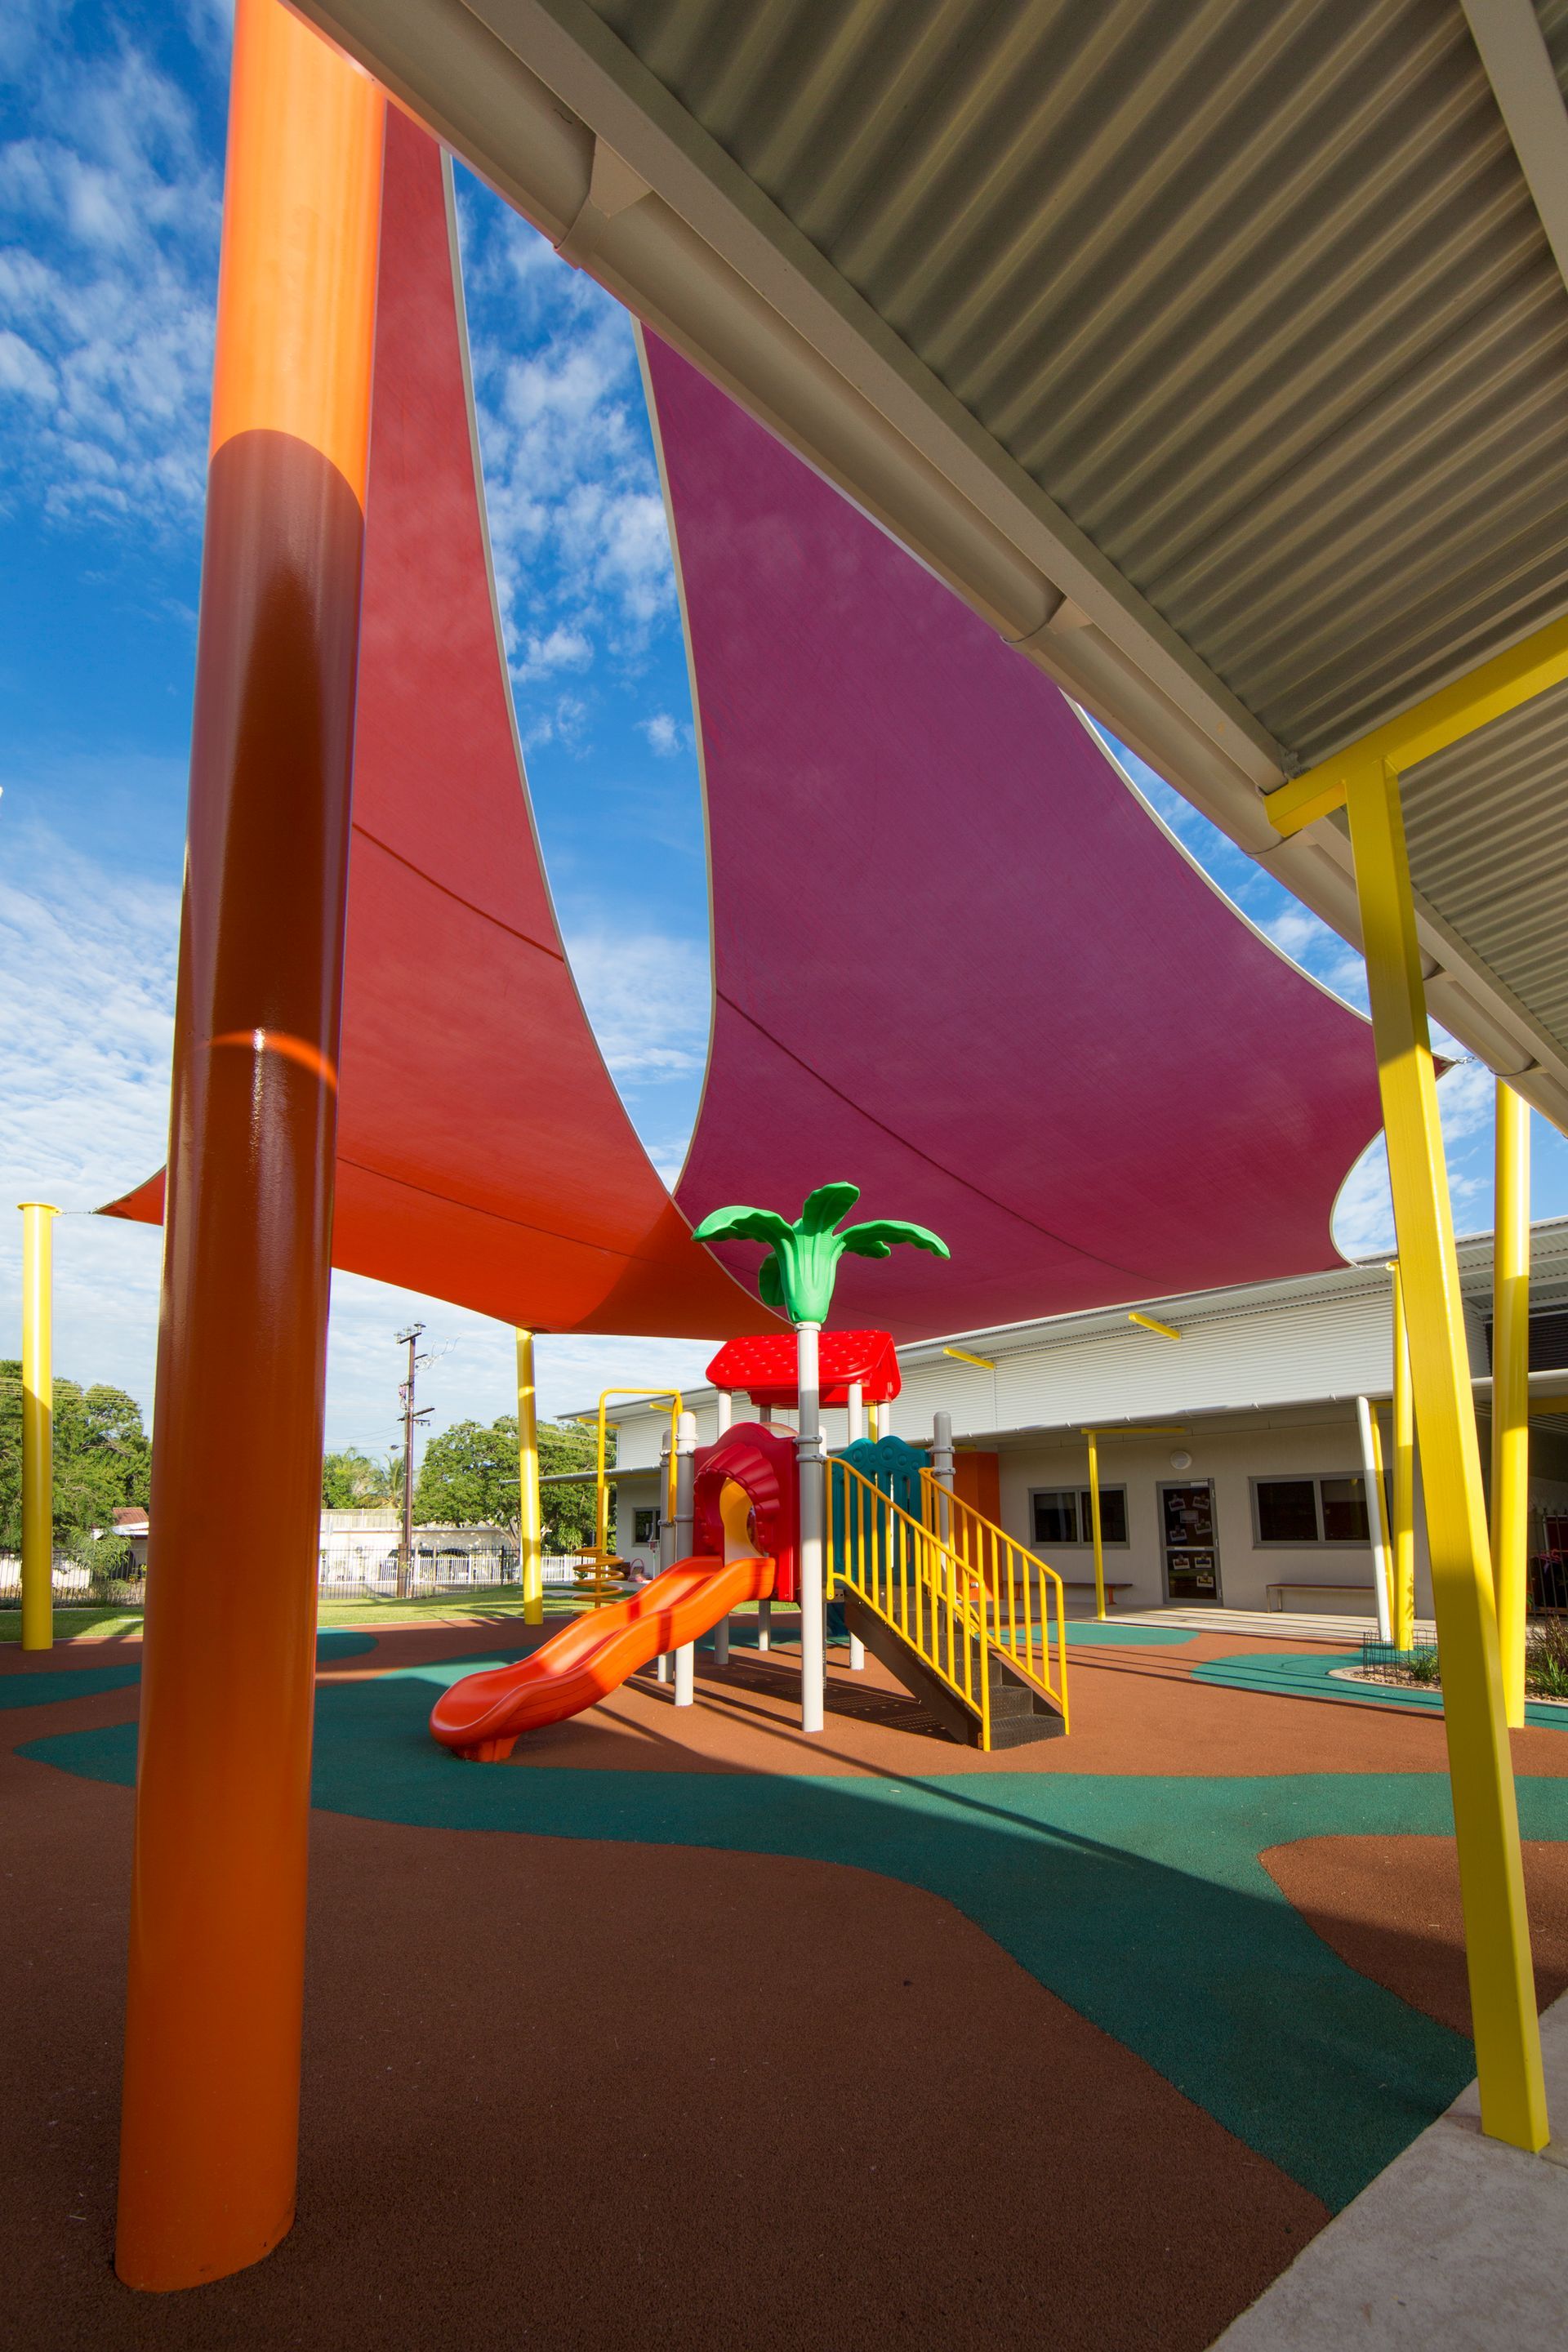 A playground with a red sail and a slide